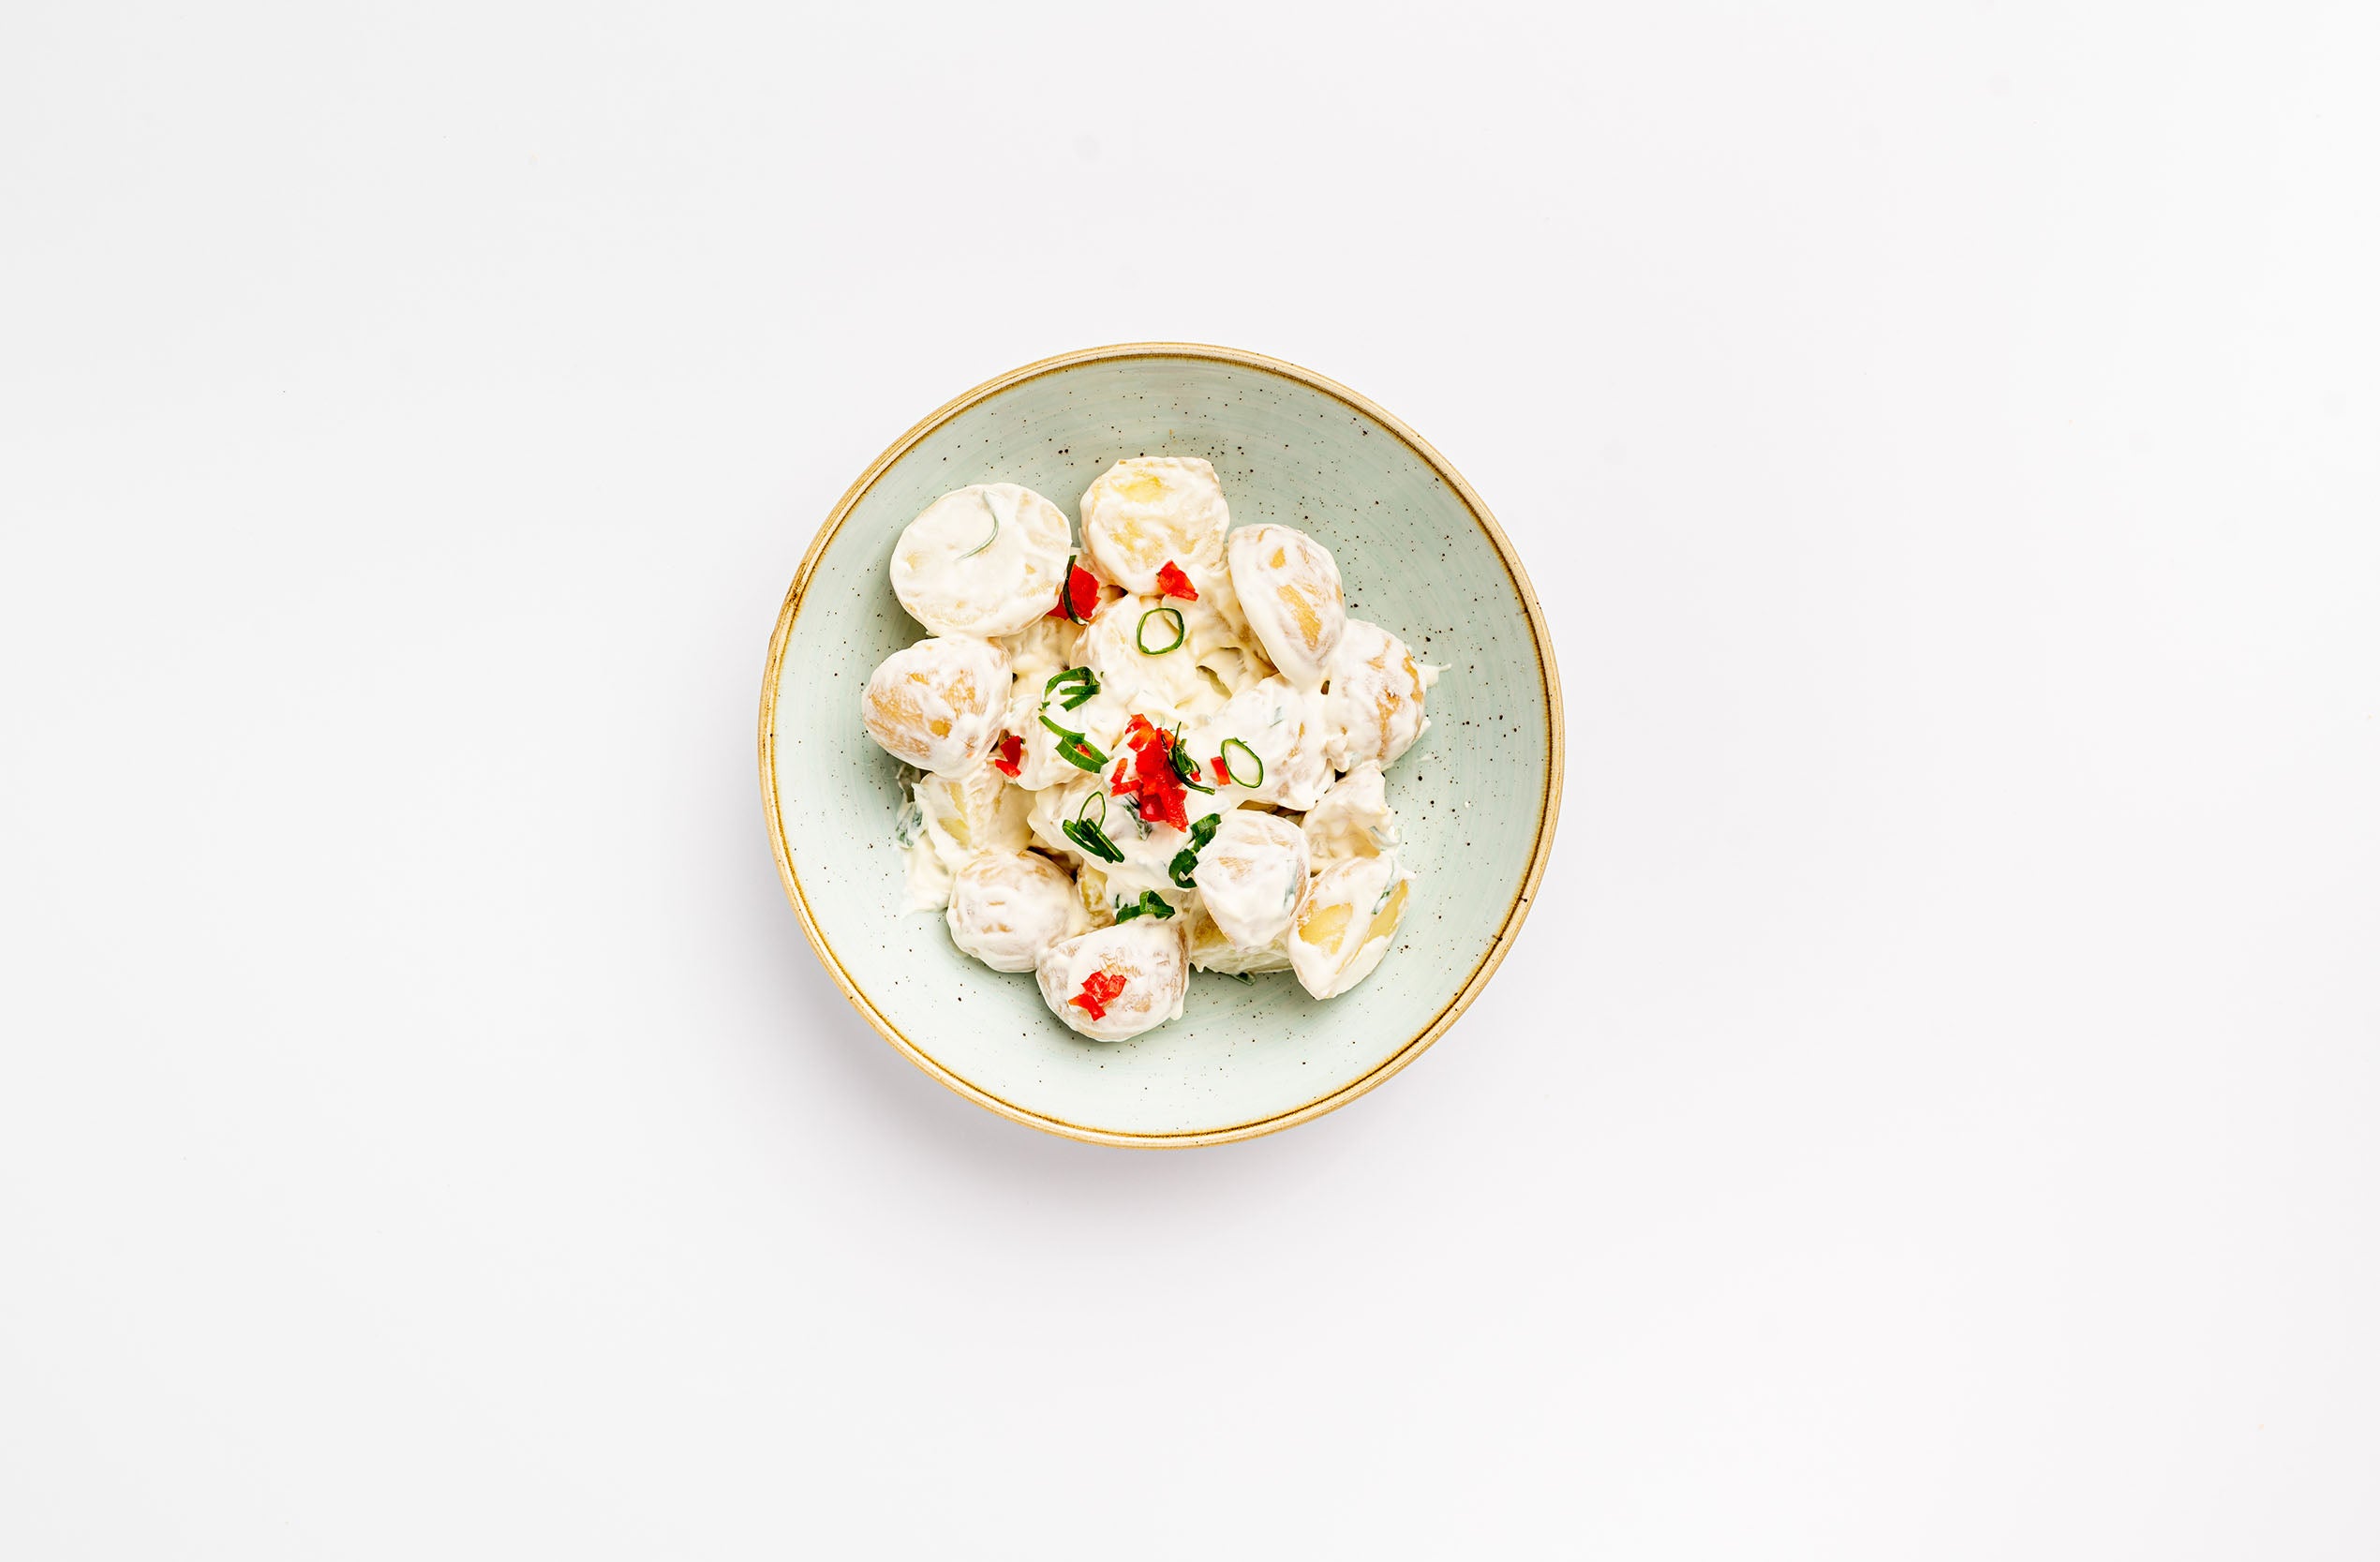 Creamy Potato Salad with Sour Cream and Chives